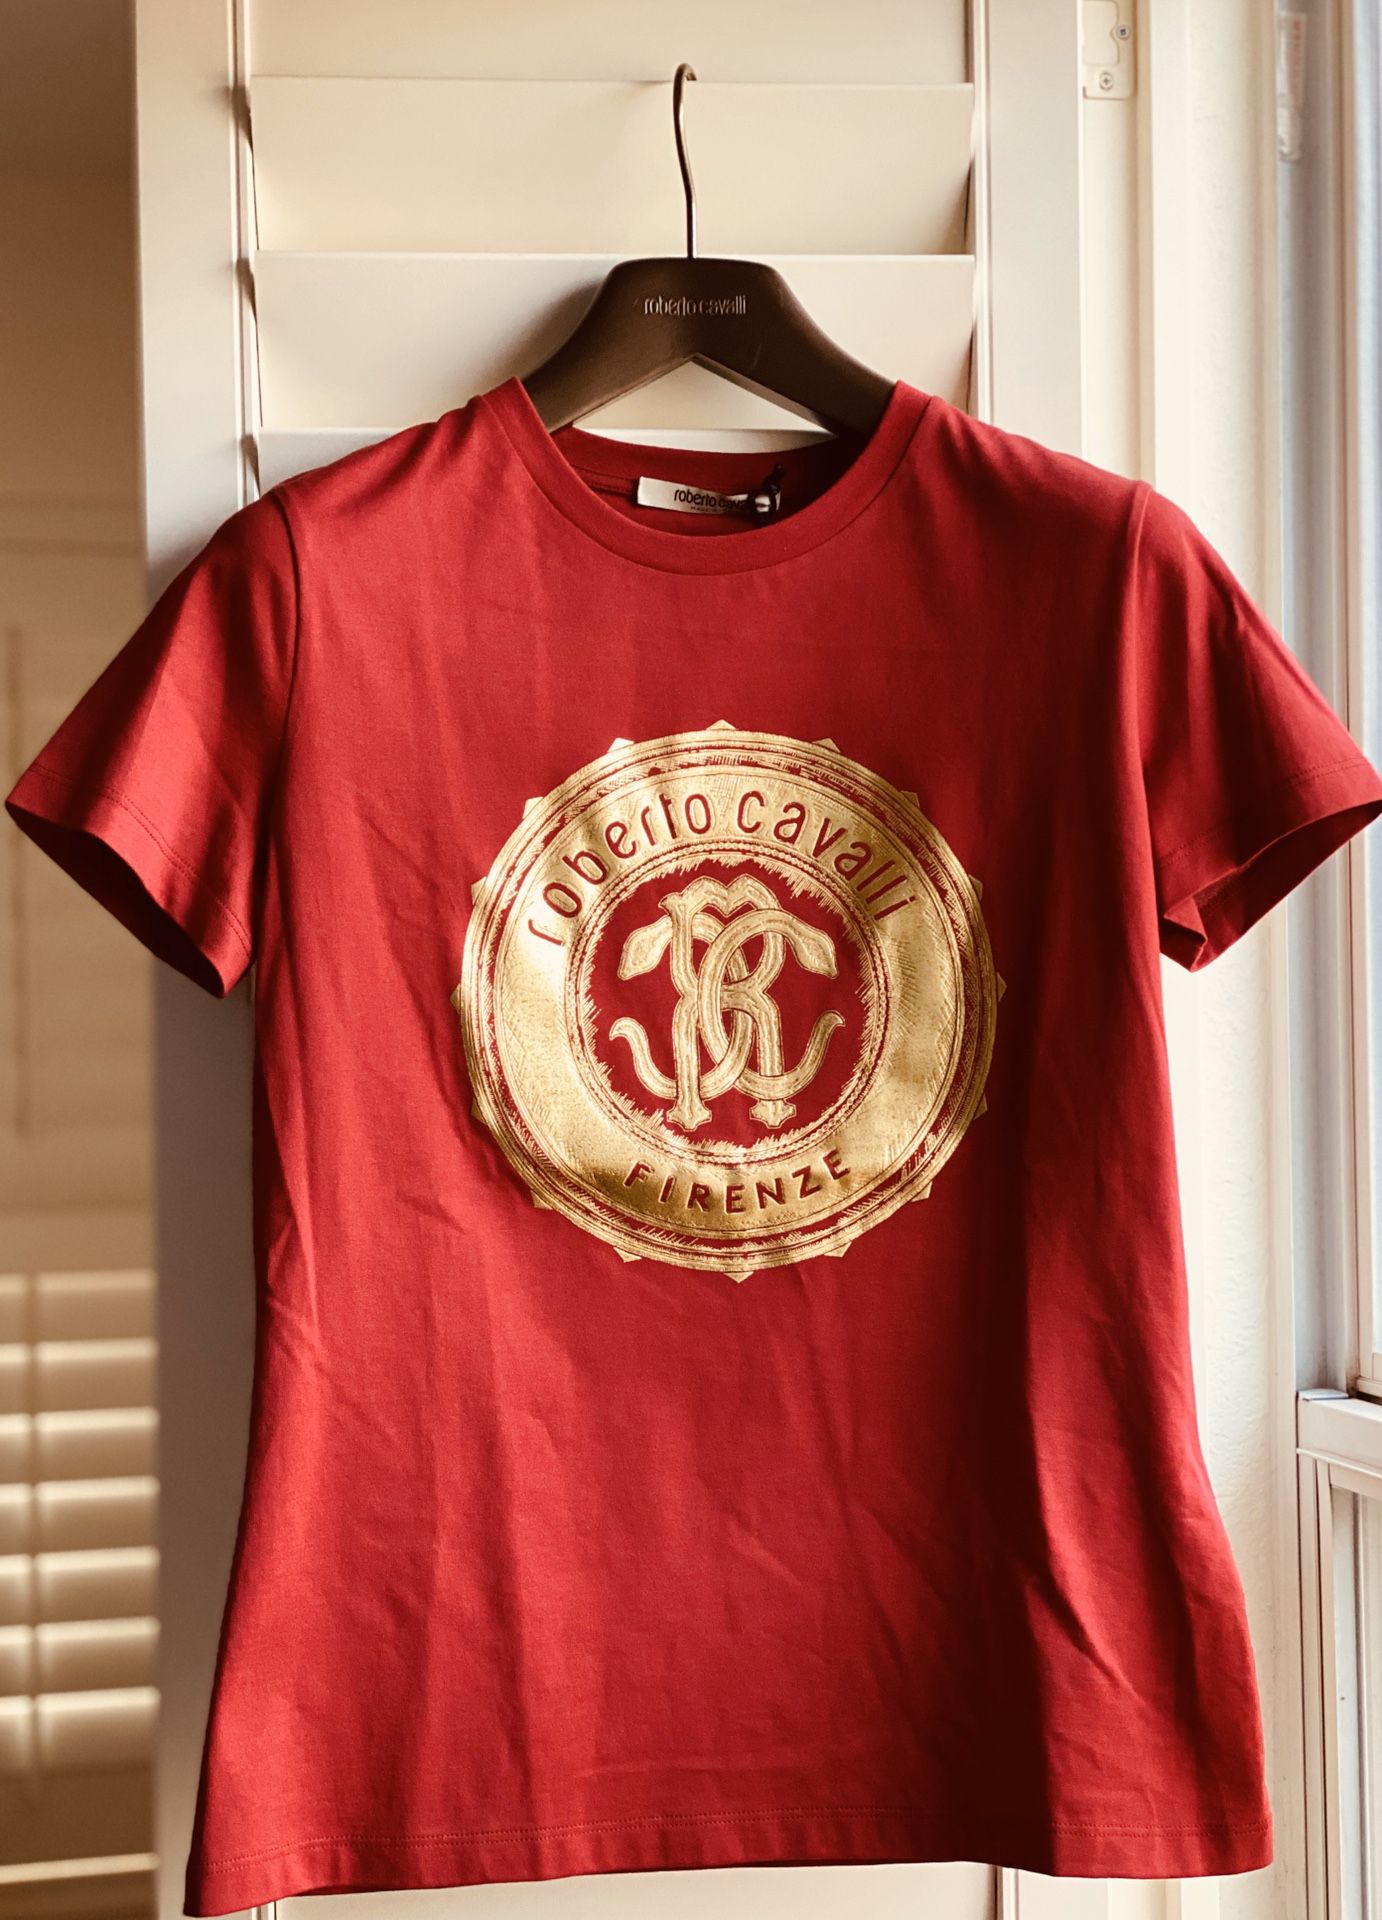 Roberto Cavalli Brand New T-Shirt Red/Gold 2019 Small Size